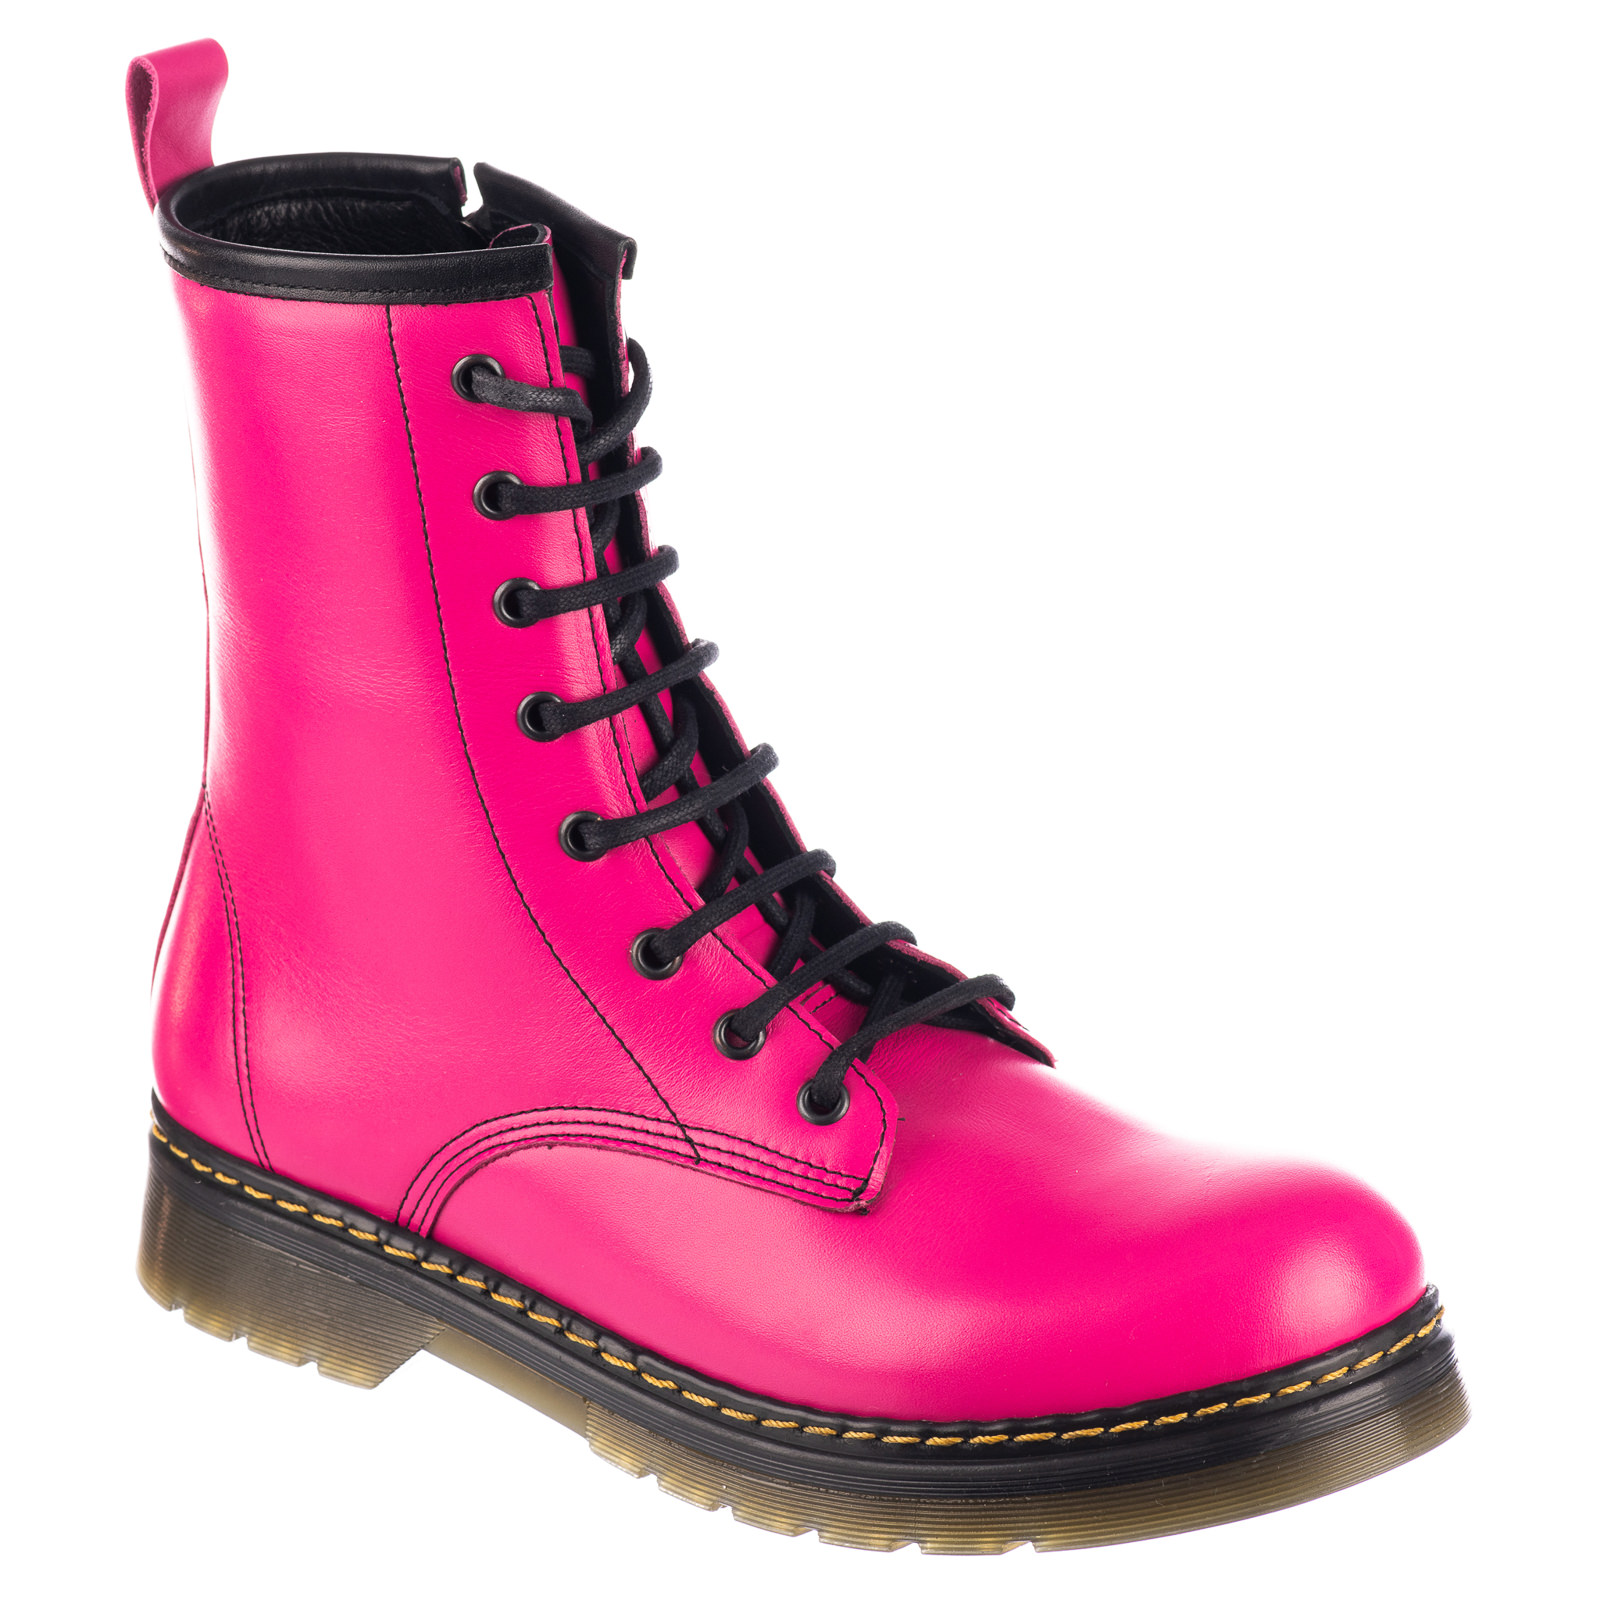 Leather booties B222 - PINK